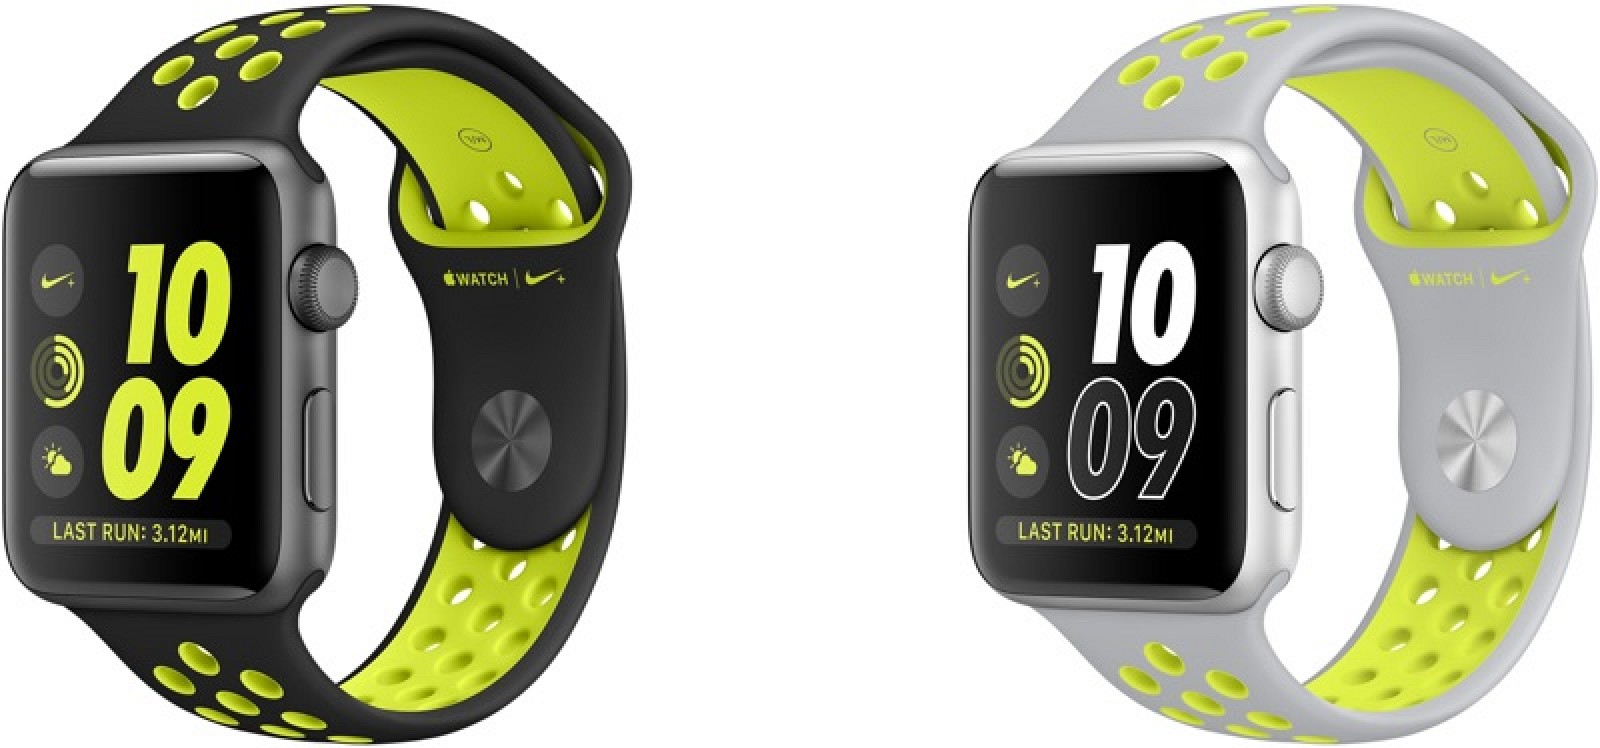 Apple Details Launch Countries for Apple Watch Nike+, Confirms Bands